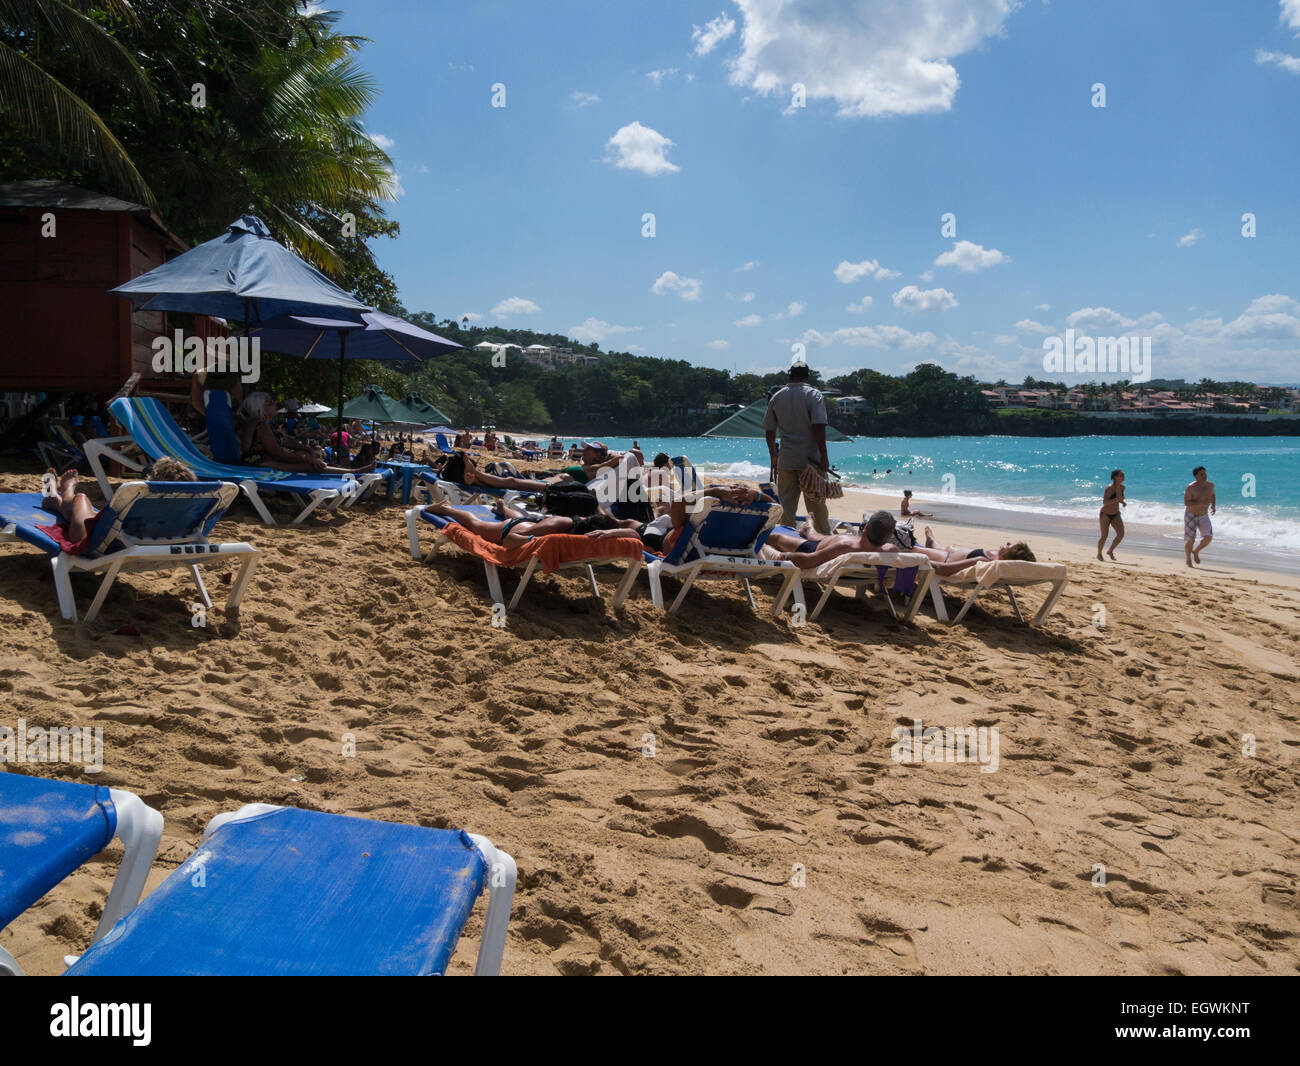 View along the popular public beach of Playa de Sosua Dominican Republic people holidaying on a lovely winters day Stock Photo